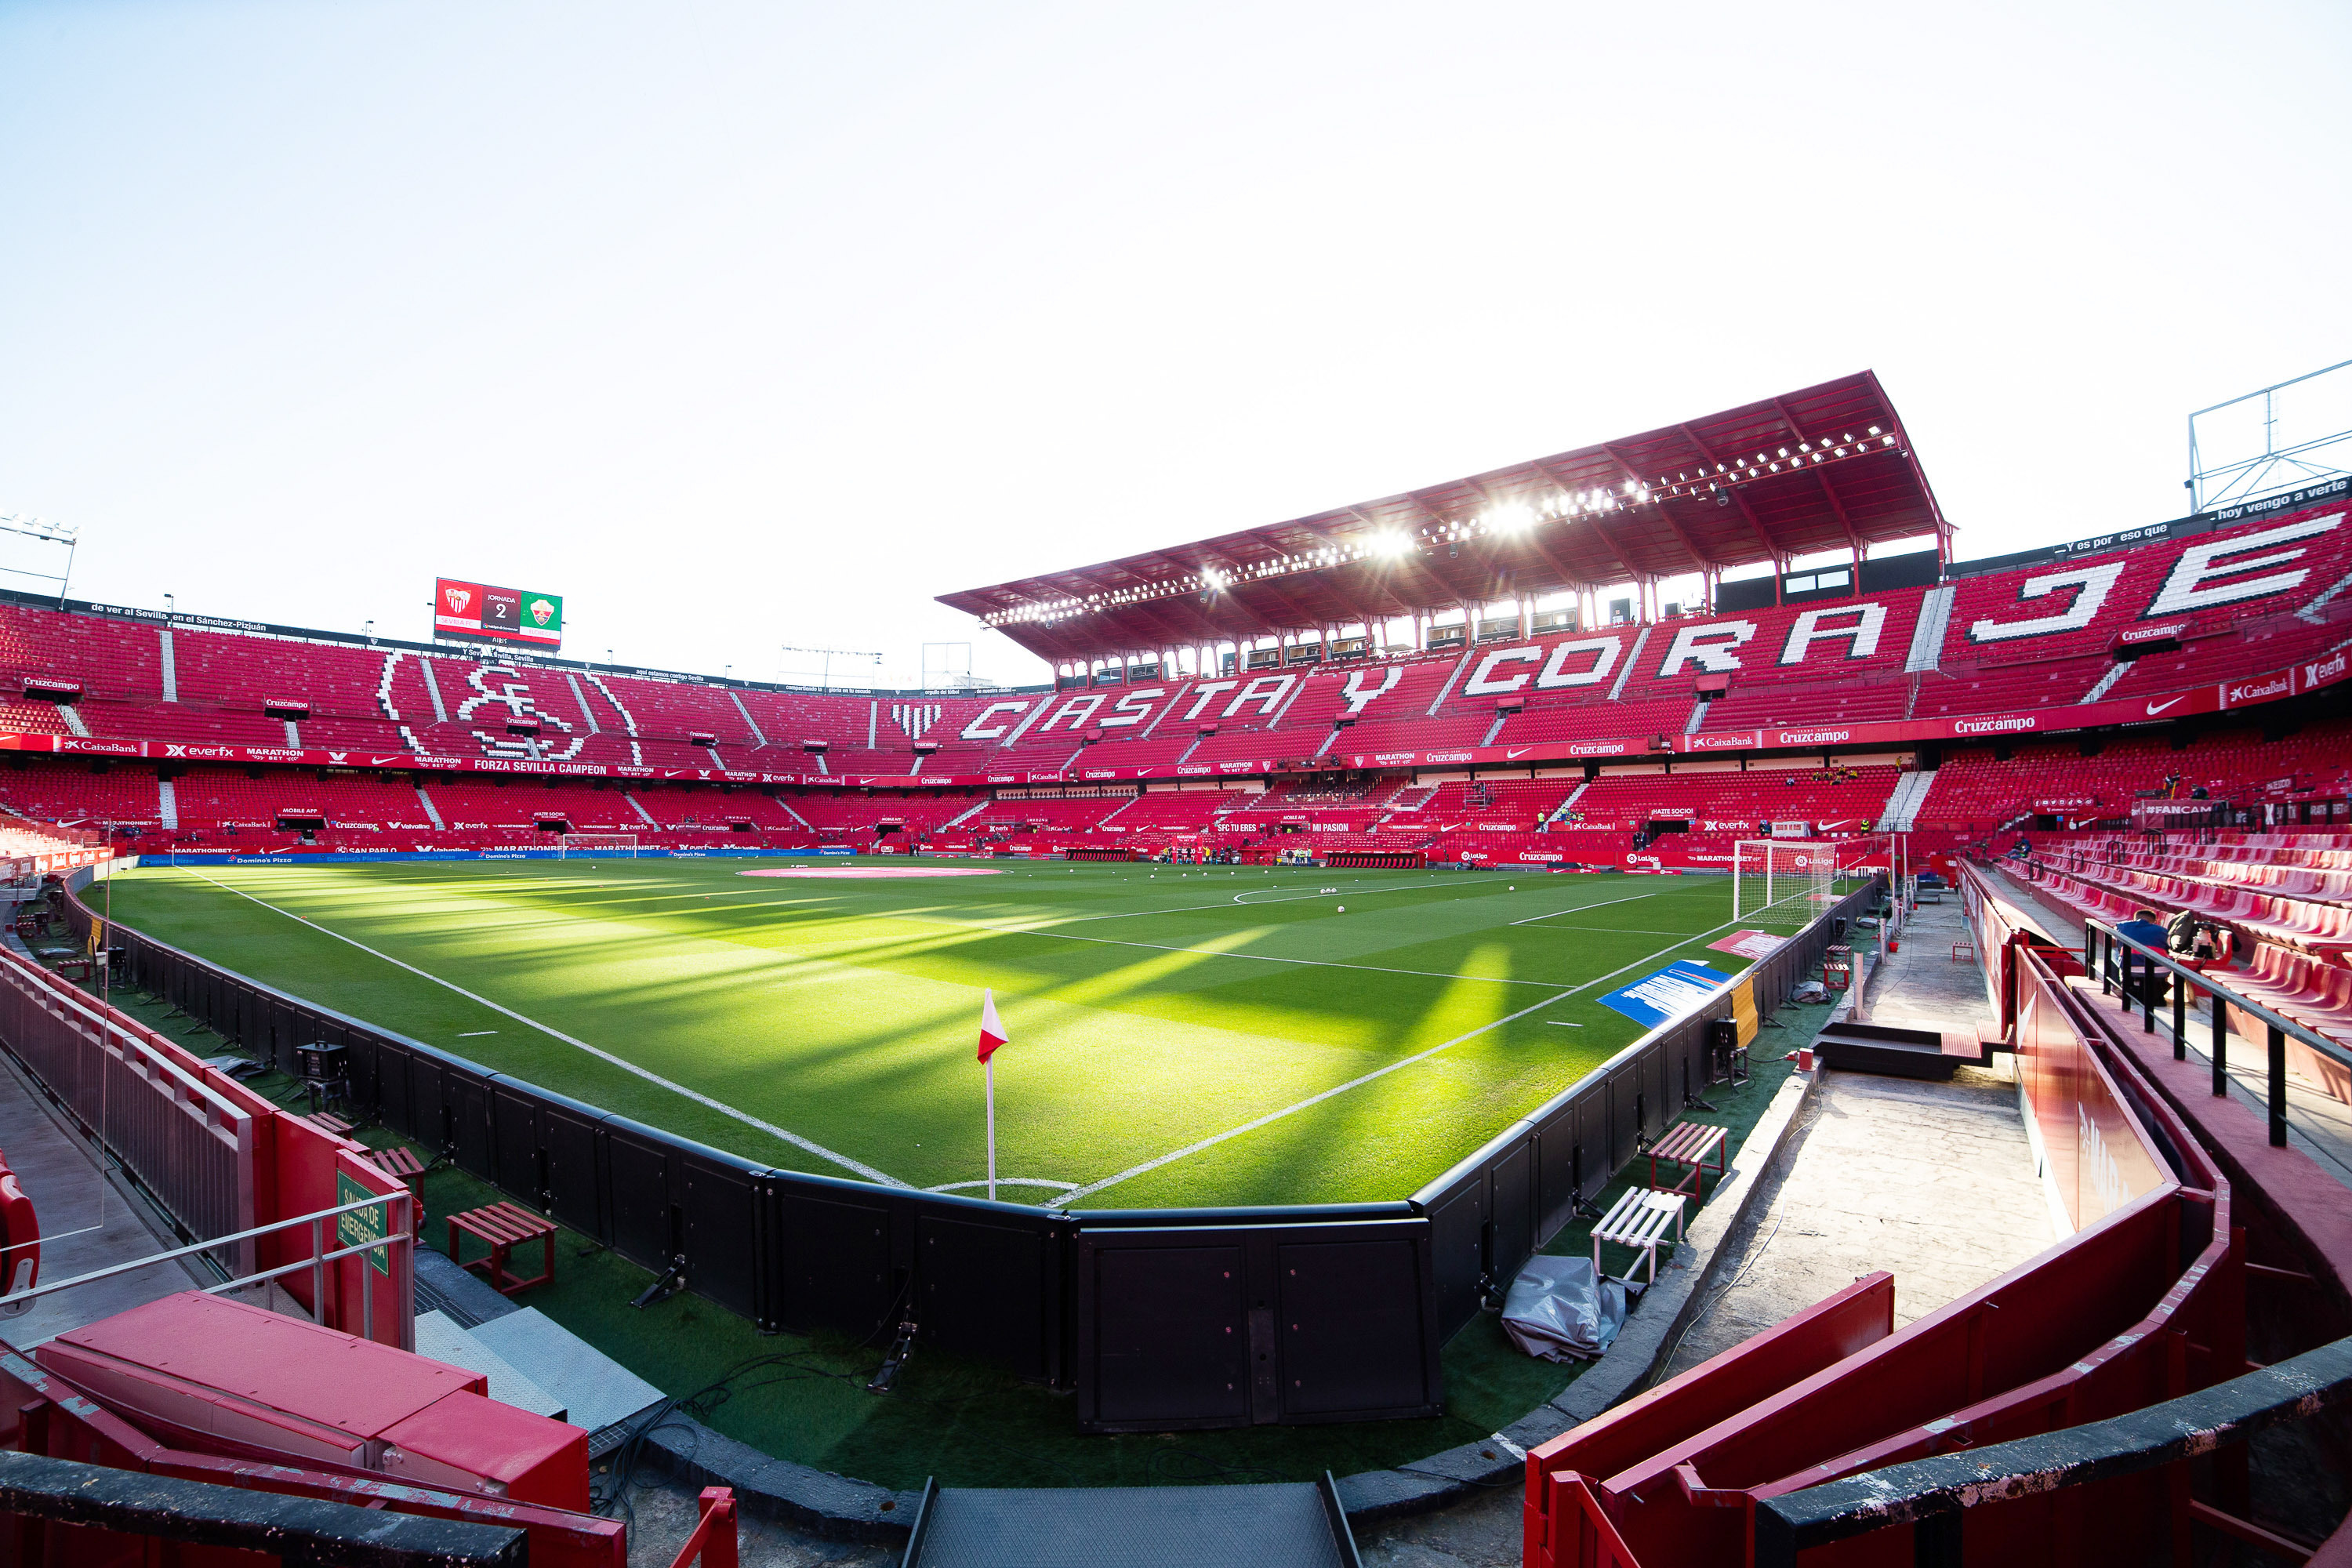 Seville to replace Bilbao and St Petersburg to replace Dublin as Euro 2020 host cities